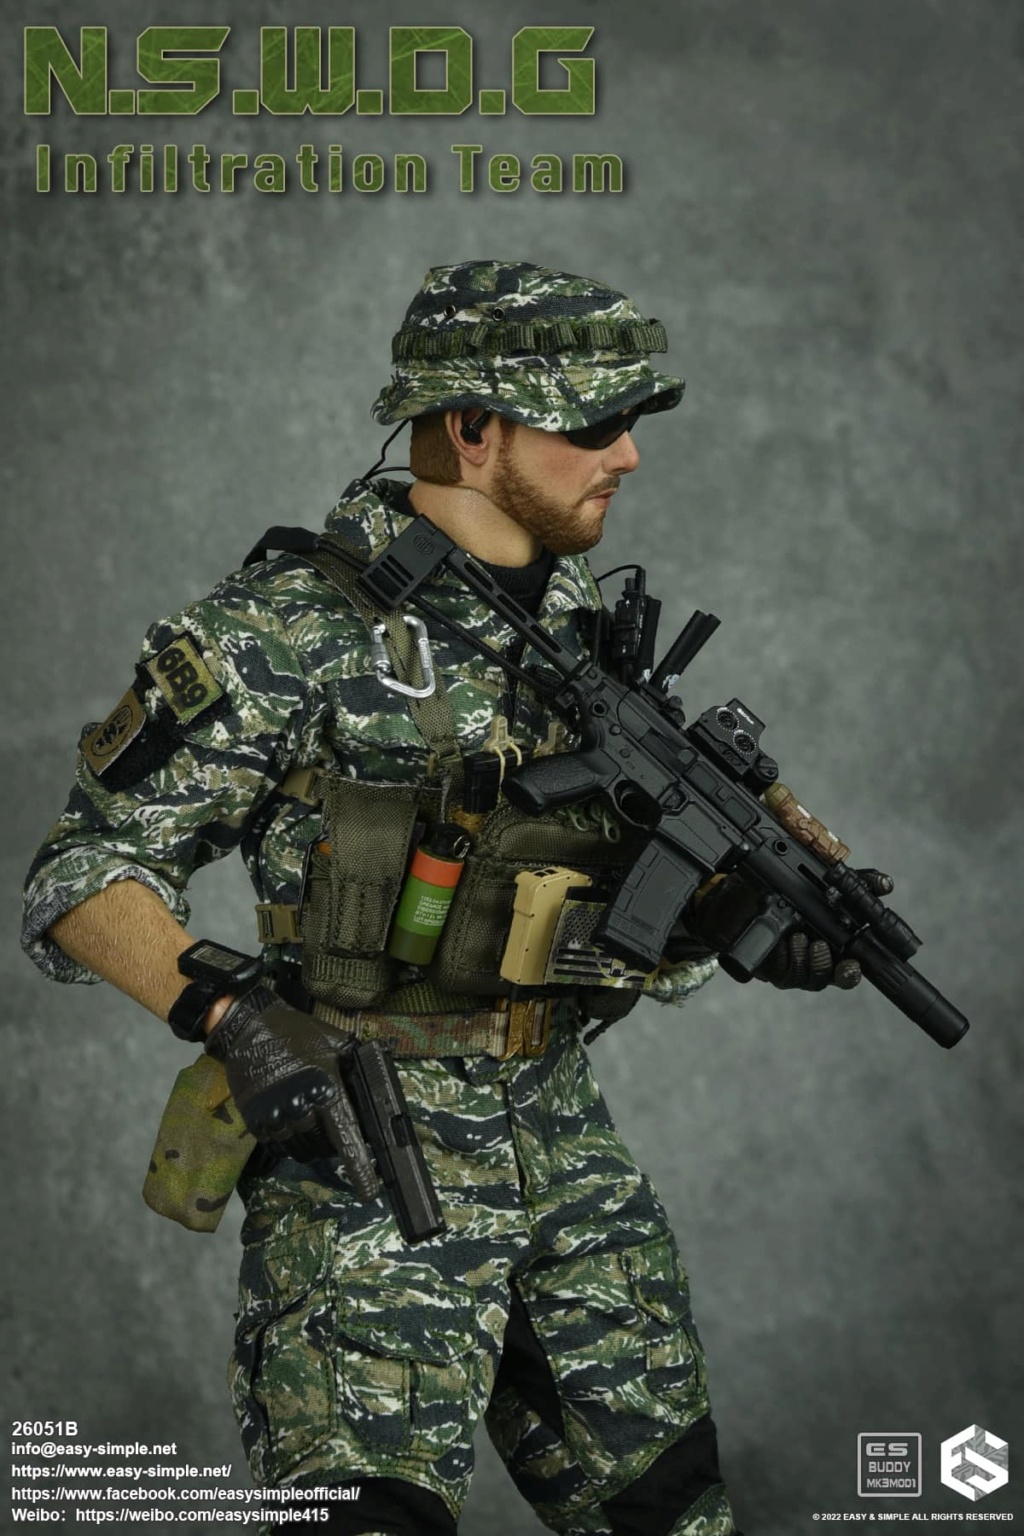 NSWDG - NEW PRODUCT: EASY AND SIMPLE 1/6 SCALE FIGURE: N.S.W.D.G INFILTRATION TEAM - (2 Versions) 10530